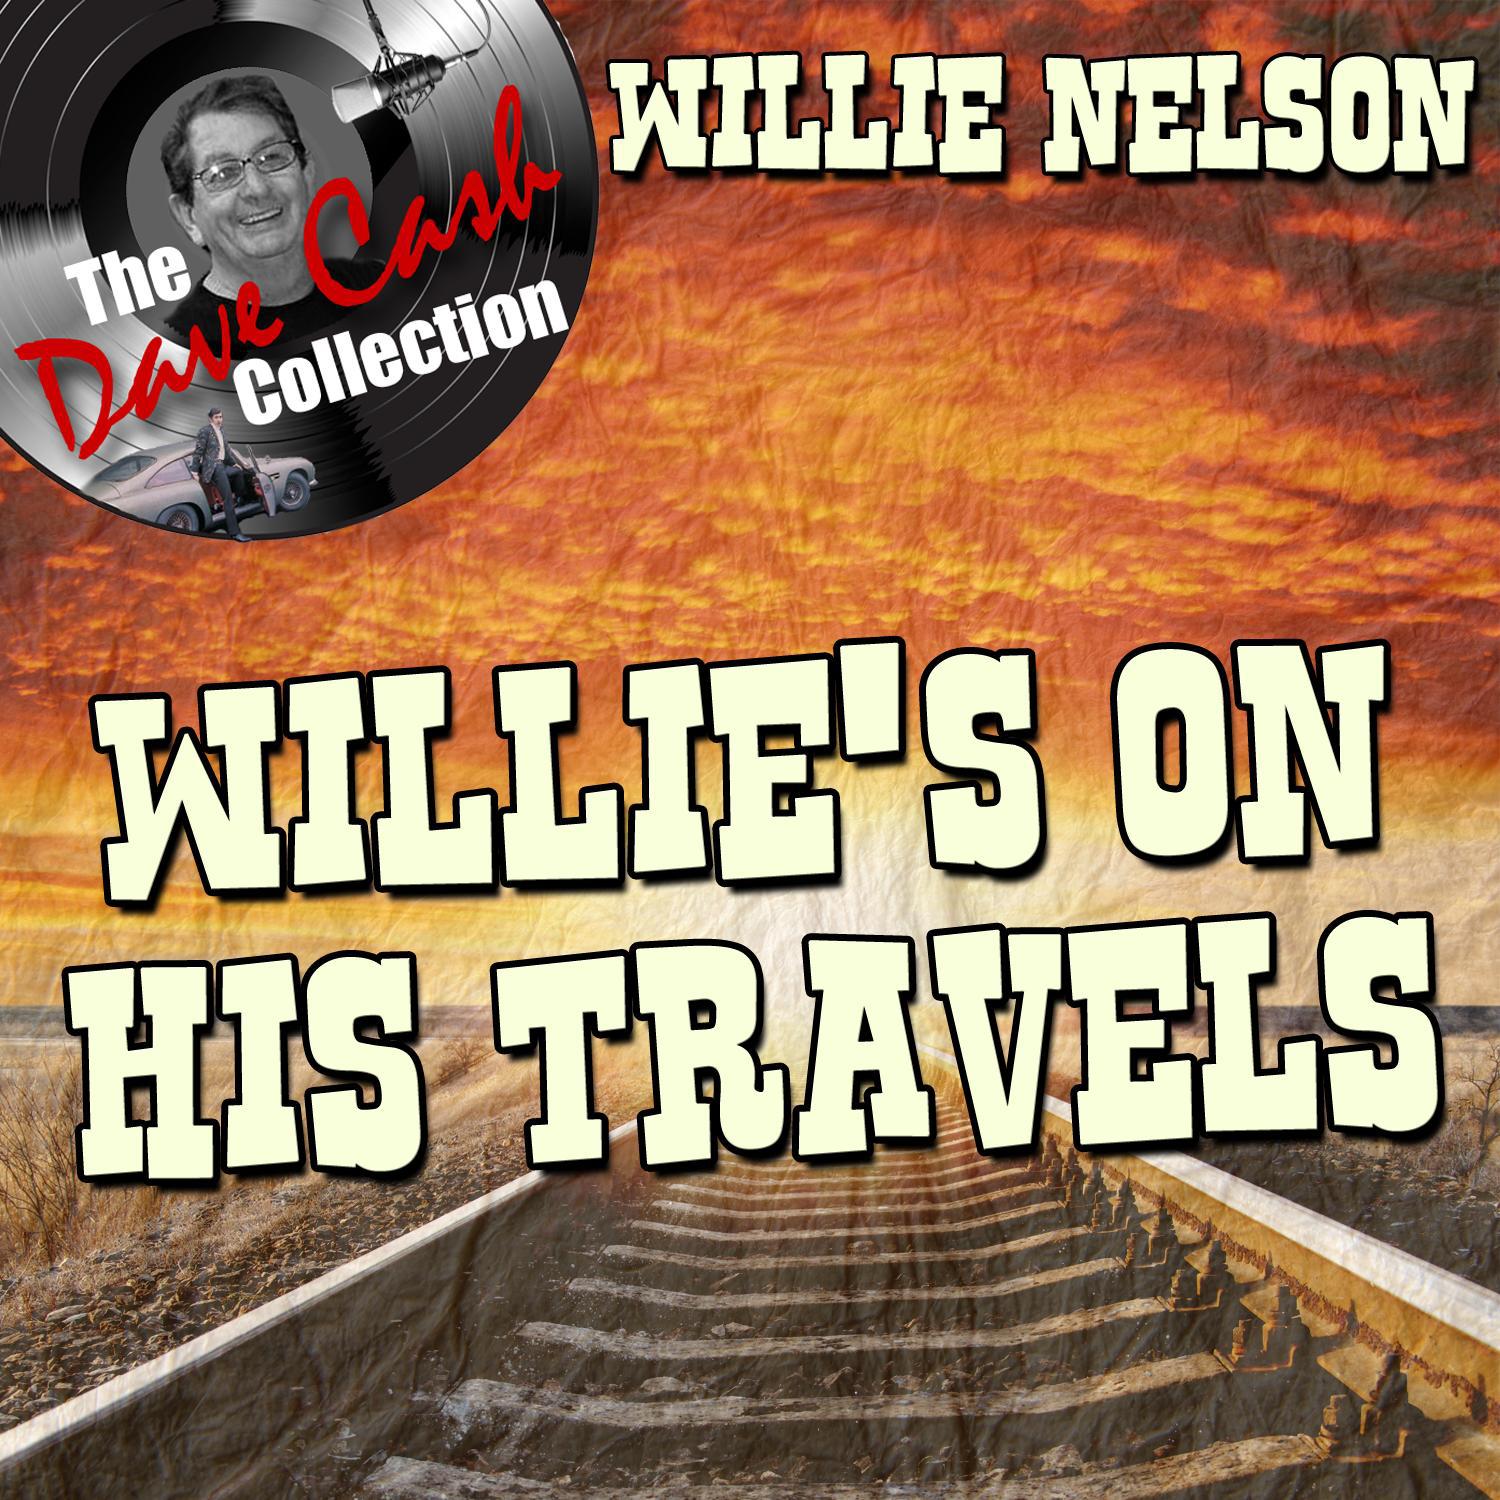 Willie's On His Travels - [The Dave Cash Collection]专辑